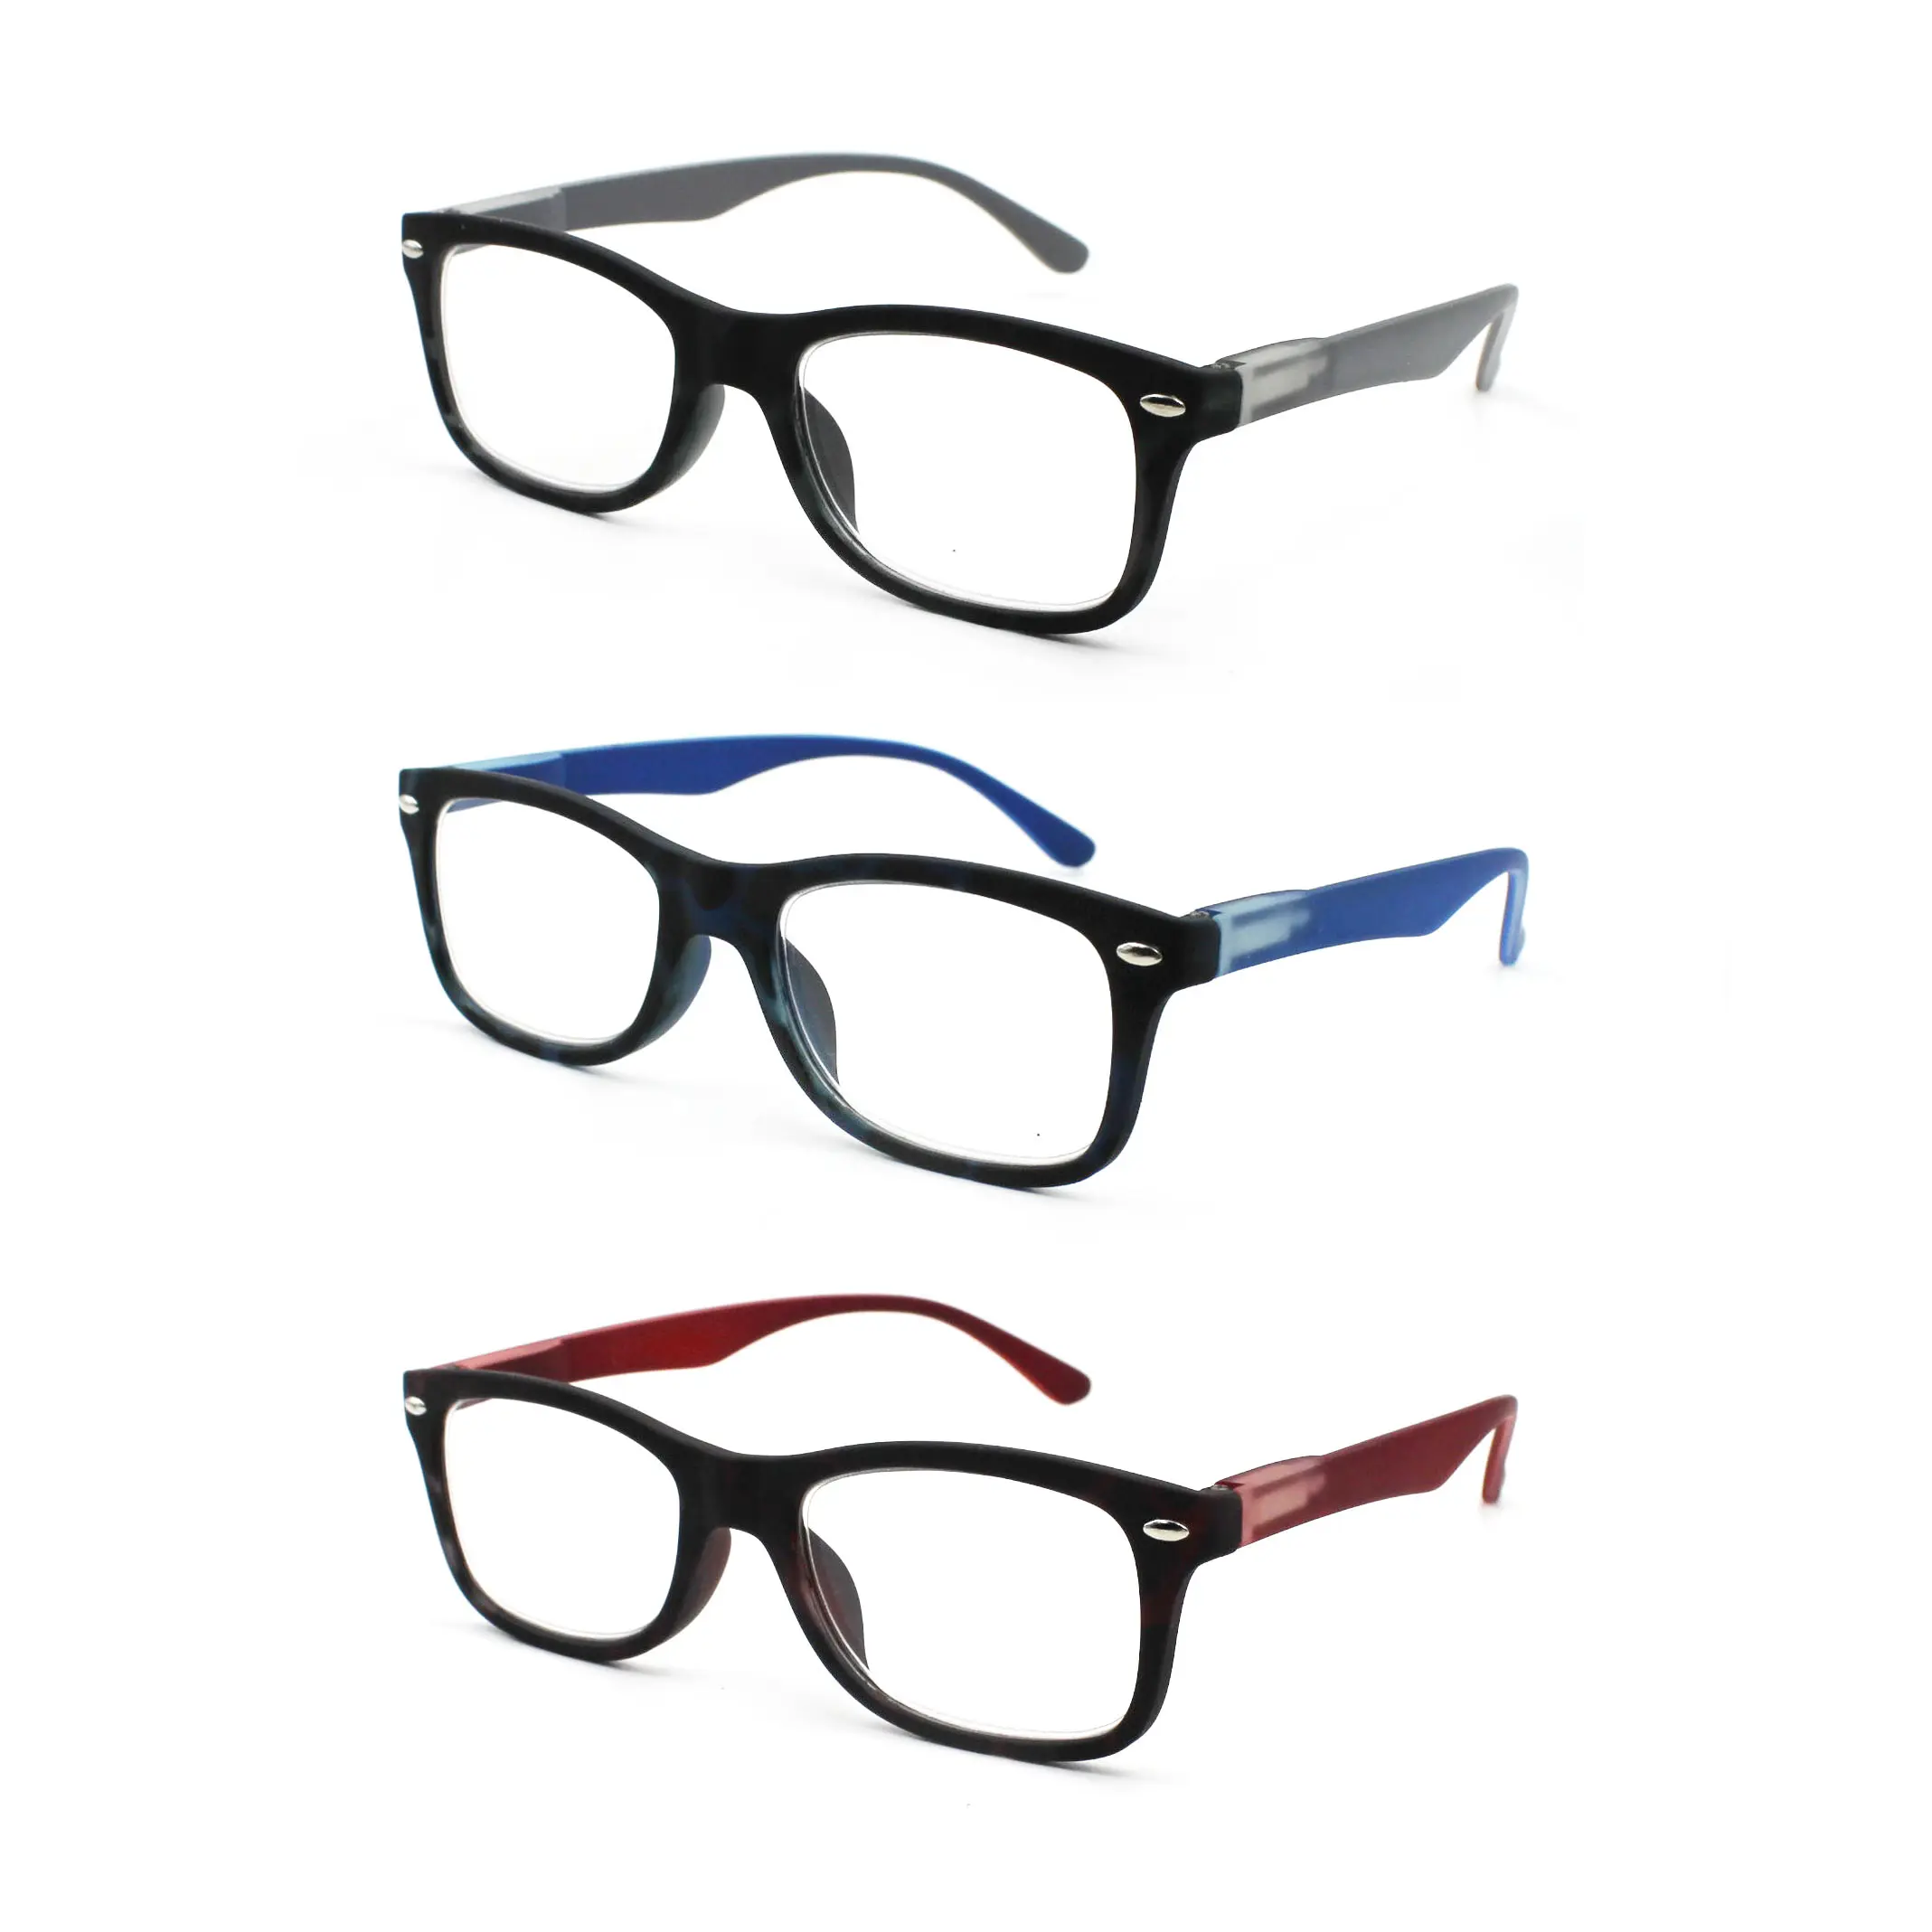 High quality promotion classical reading glasses